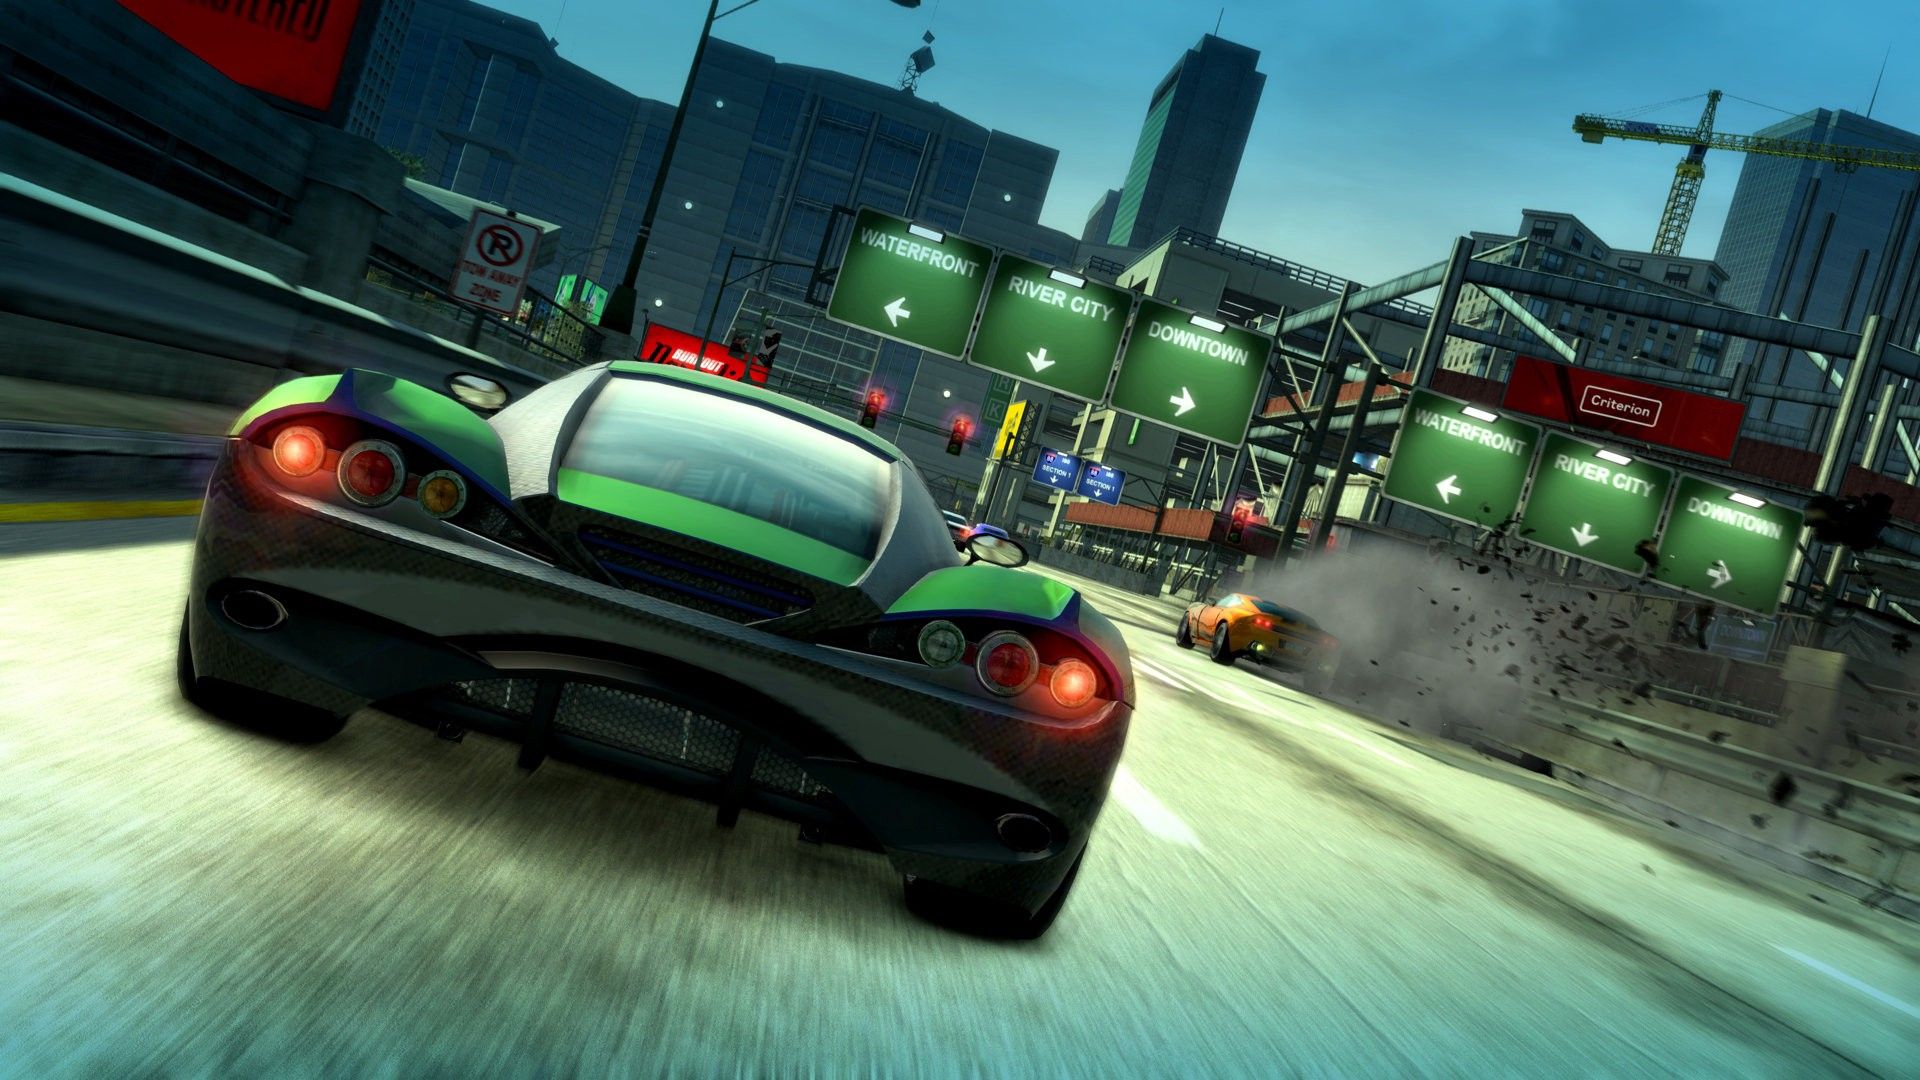 Burnout Paradise Remastered has a Great Sound Mix